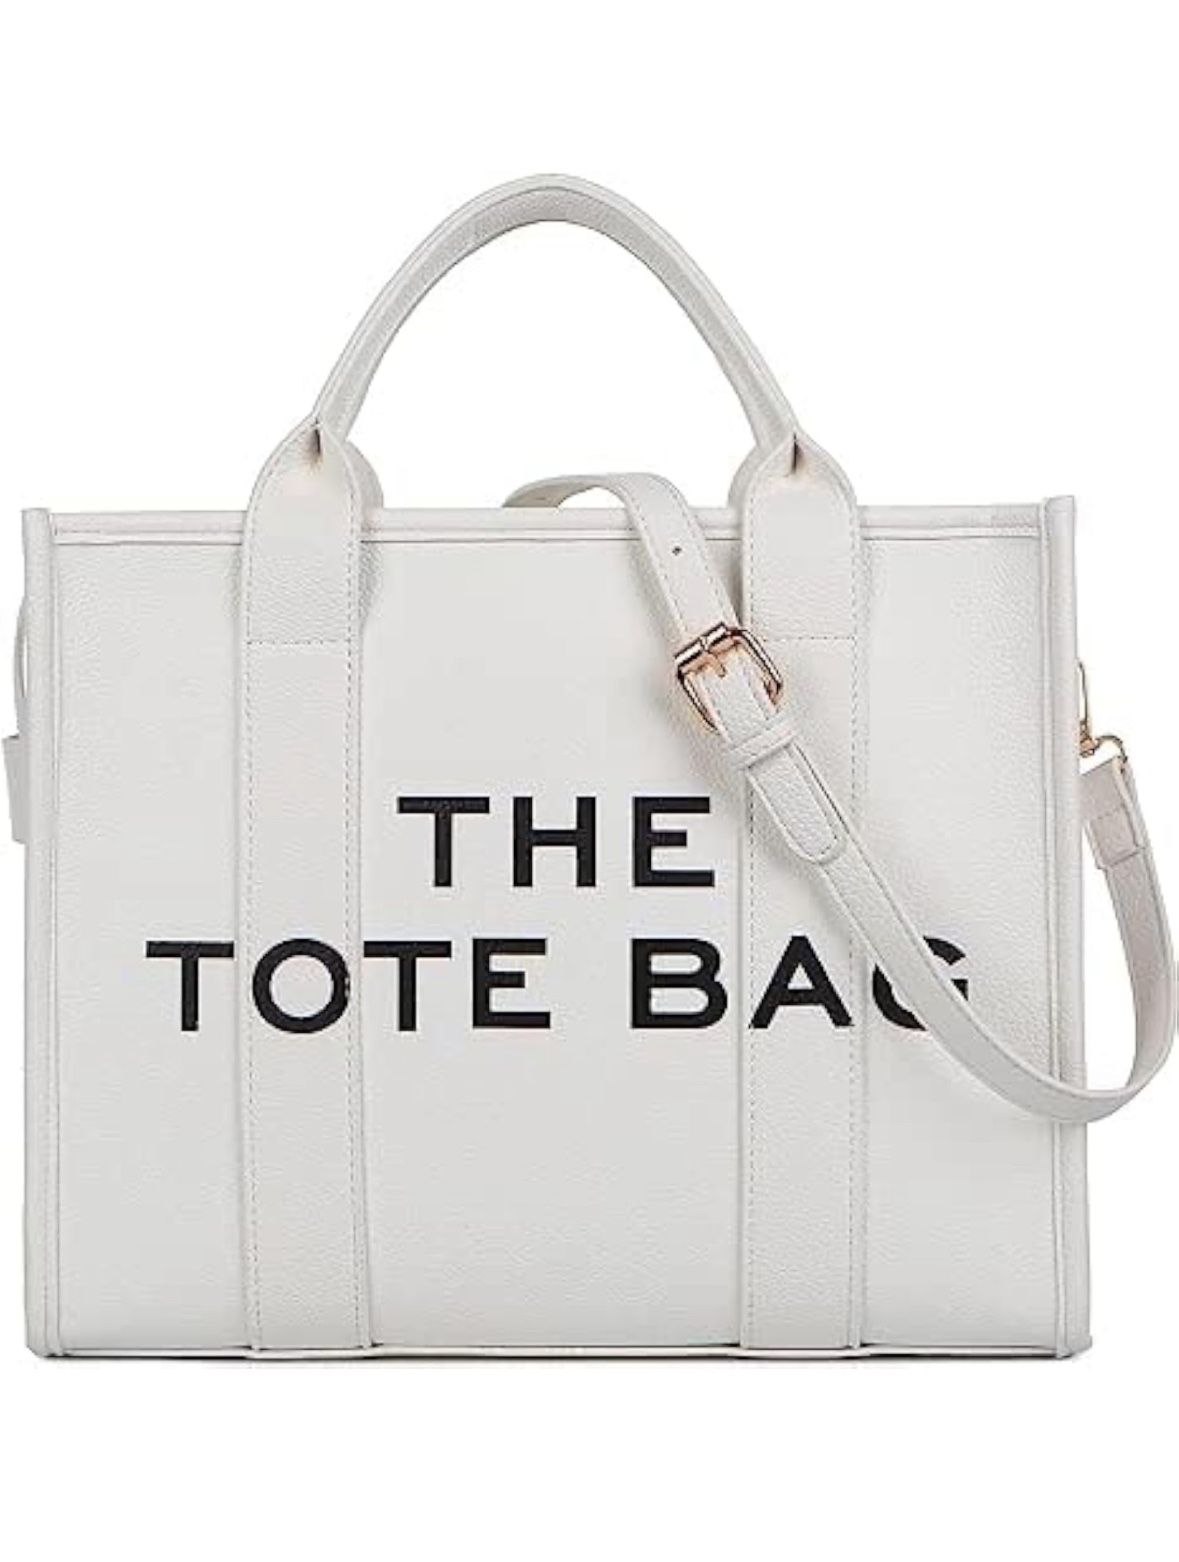 The Tote Bag for Women